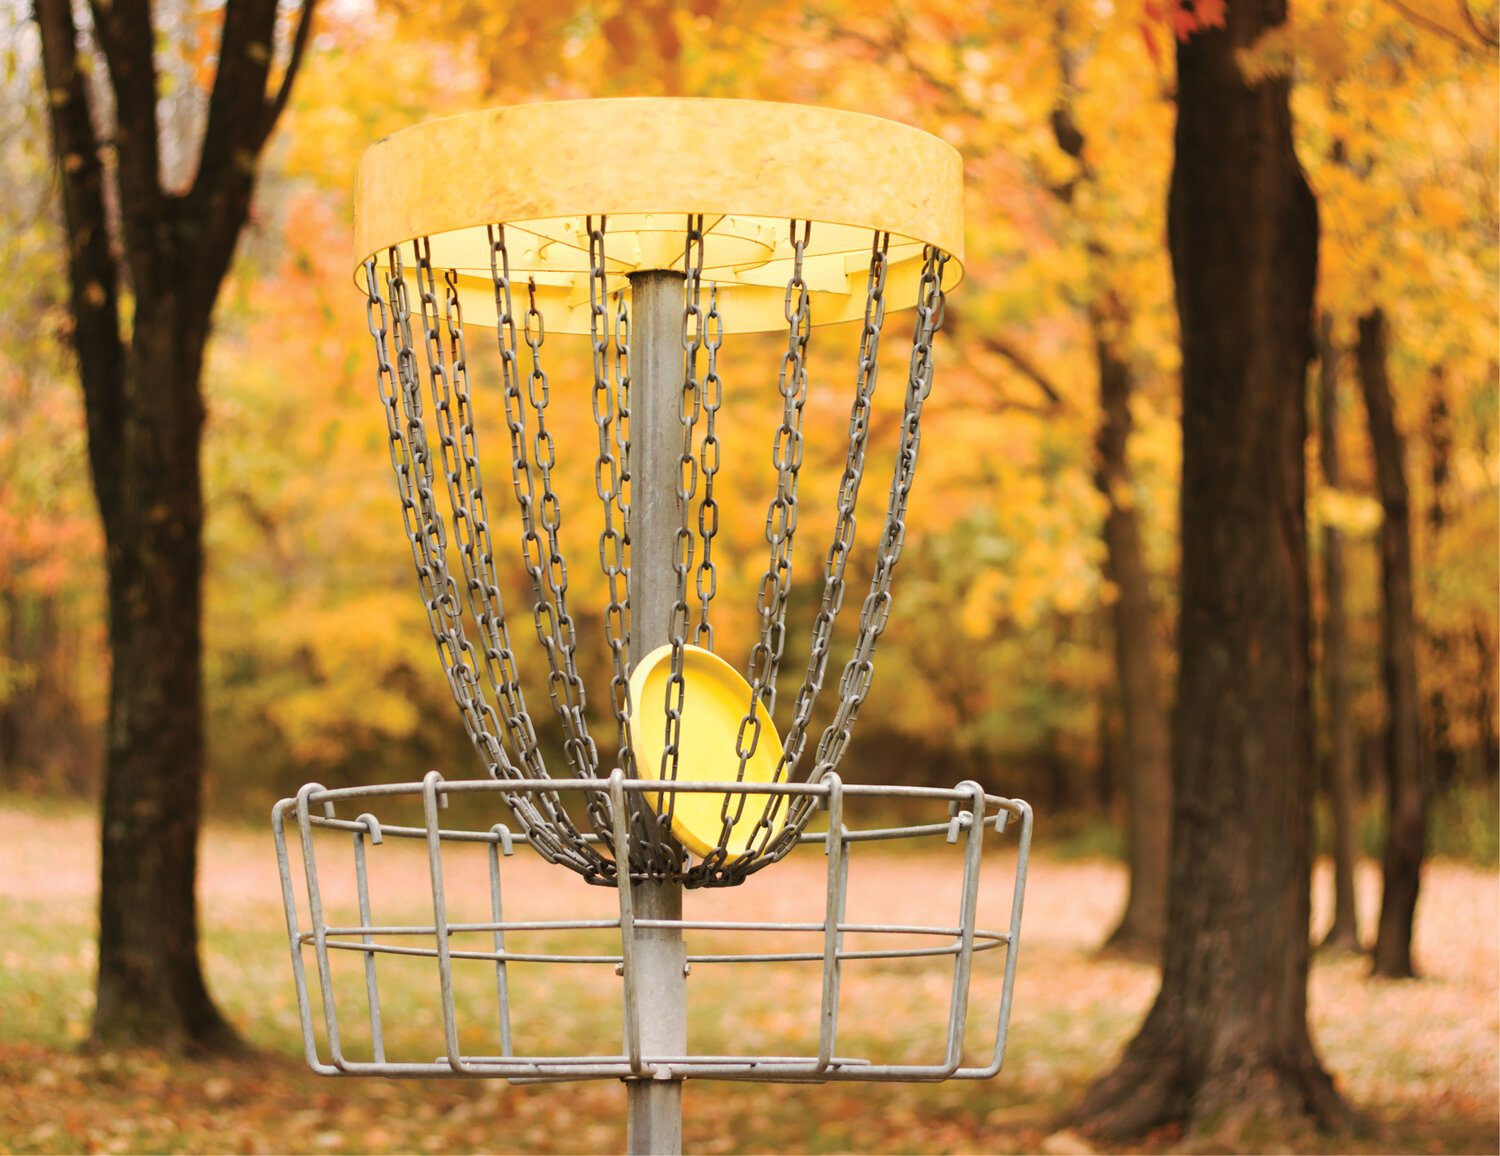 Frisbee golf, more appropriately called disc golf, is one of the fastest-growing sports in the United States. A disc golf course at the recreational complex will draw players from the surrounding area.